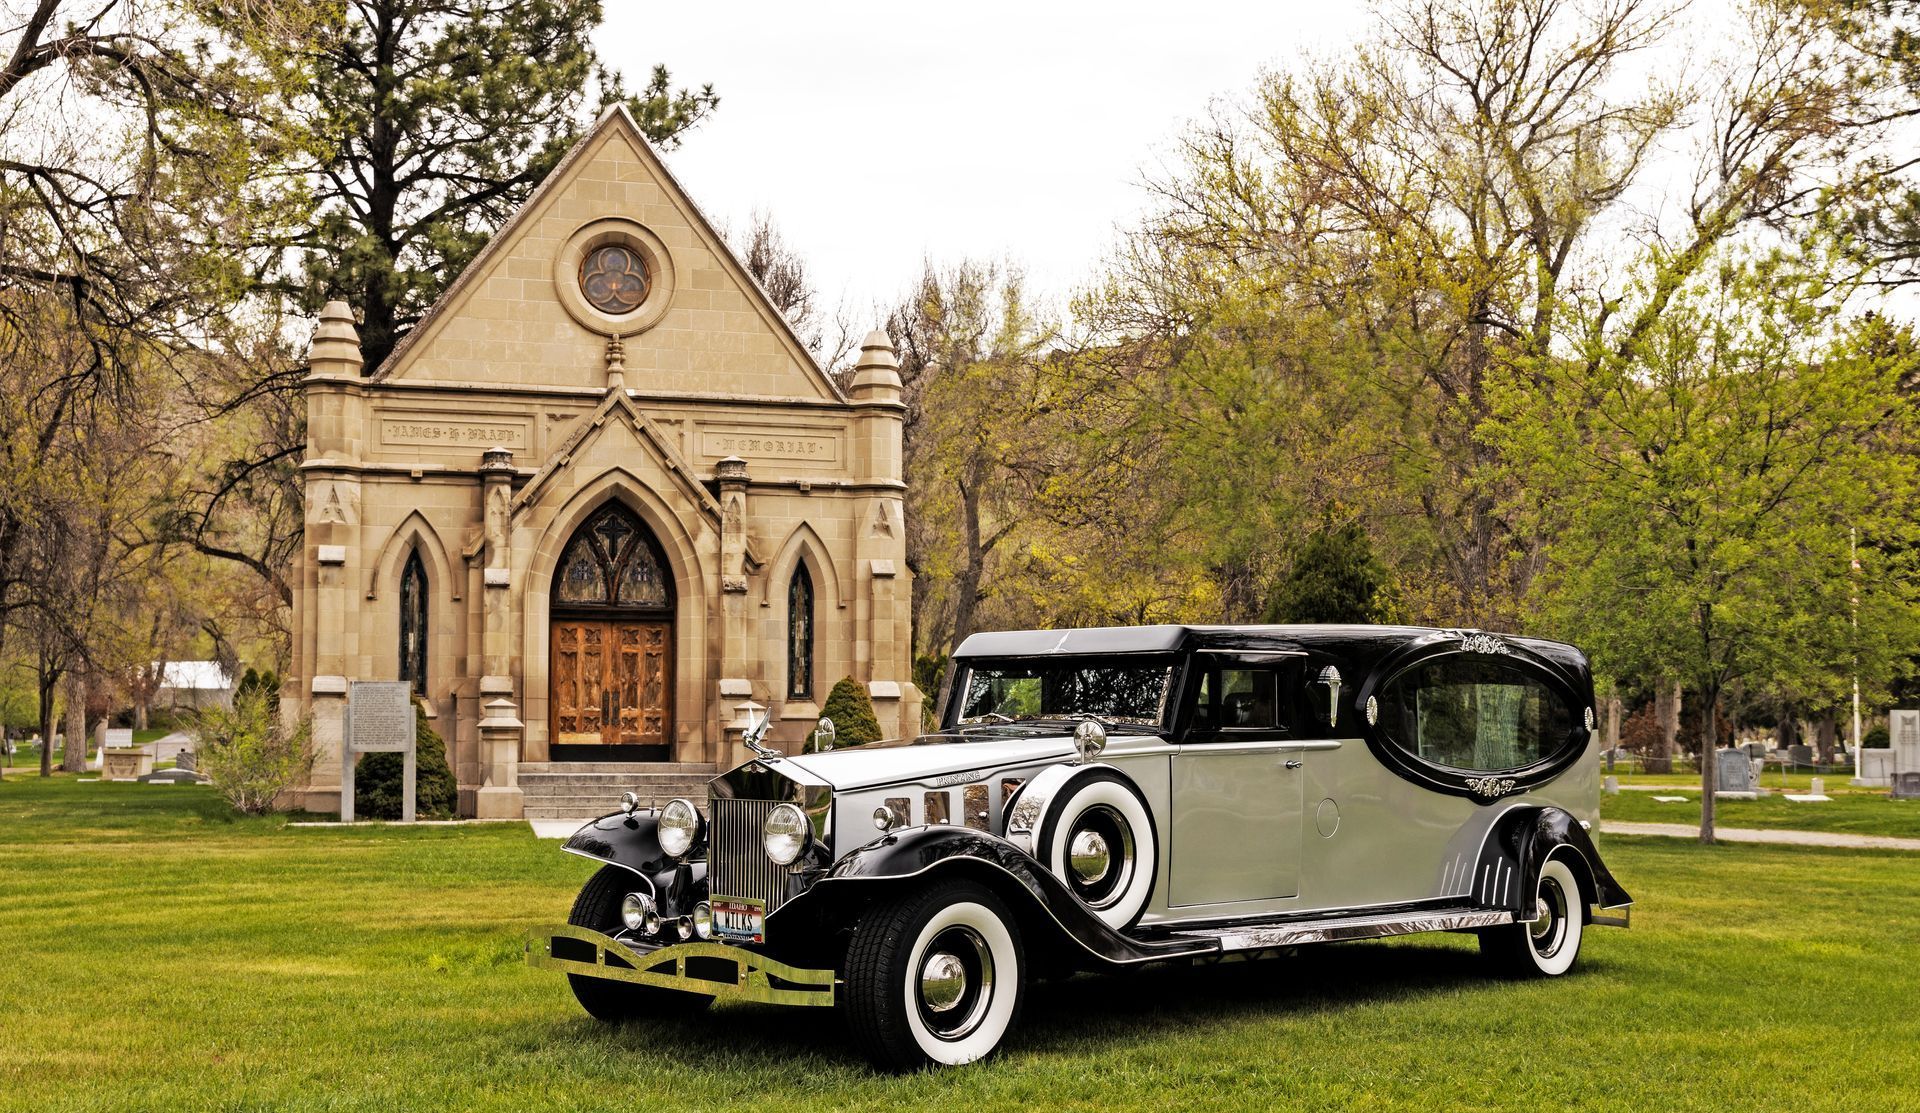 A funeral car is parked in front of a church in a cemetery.